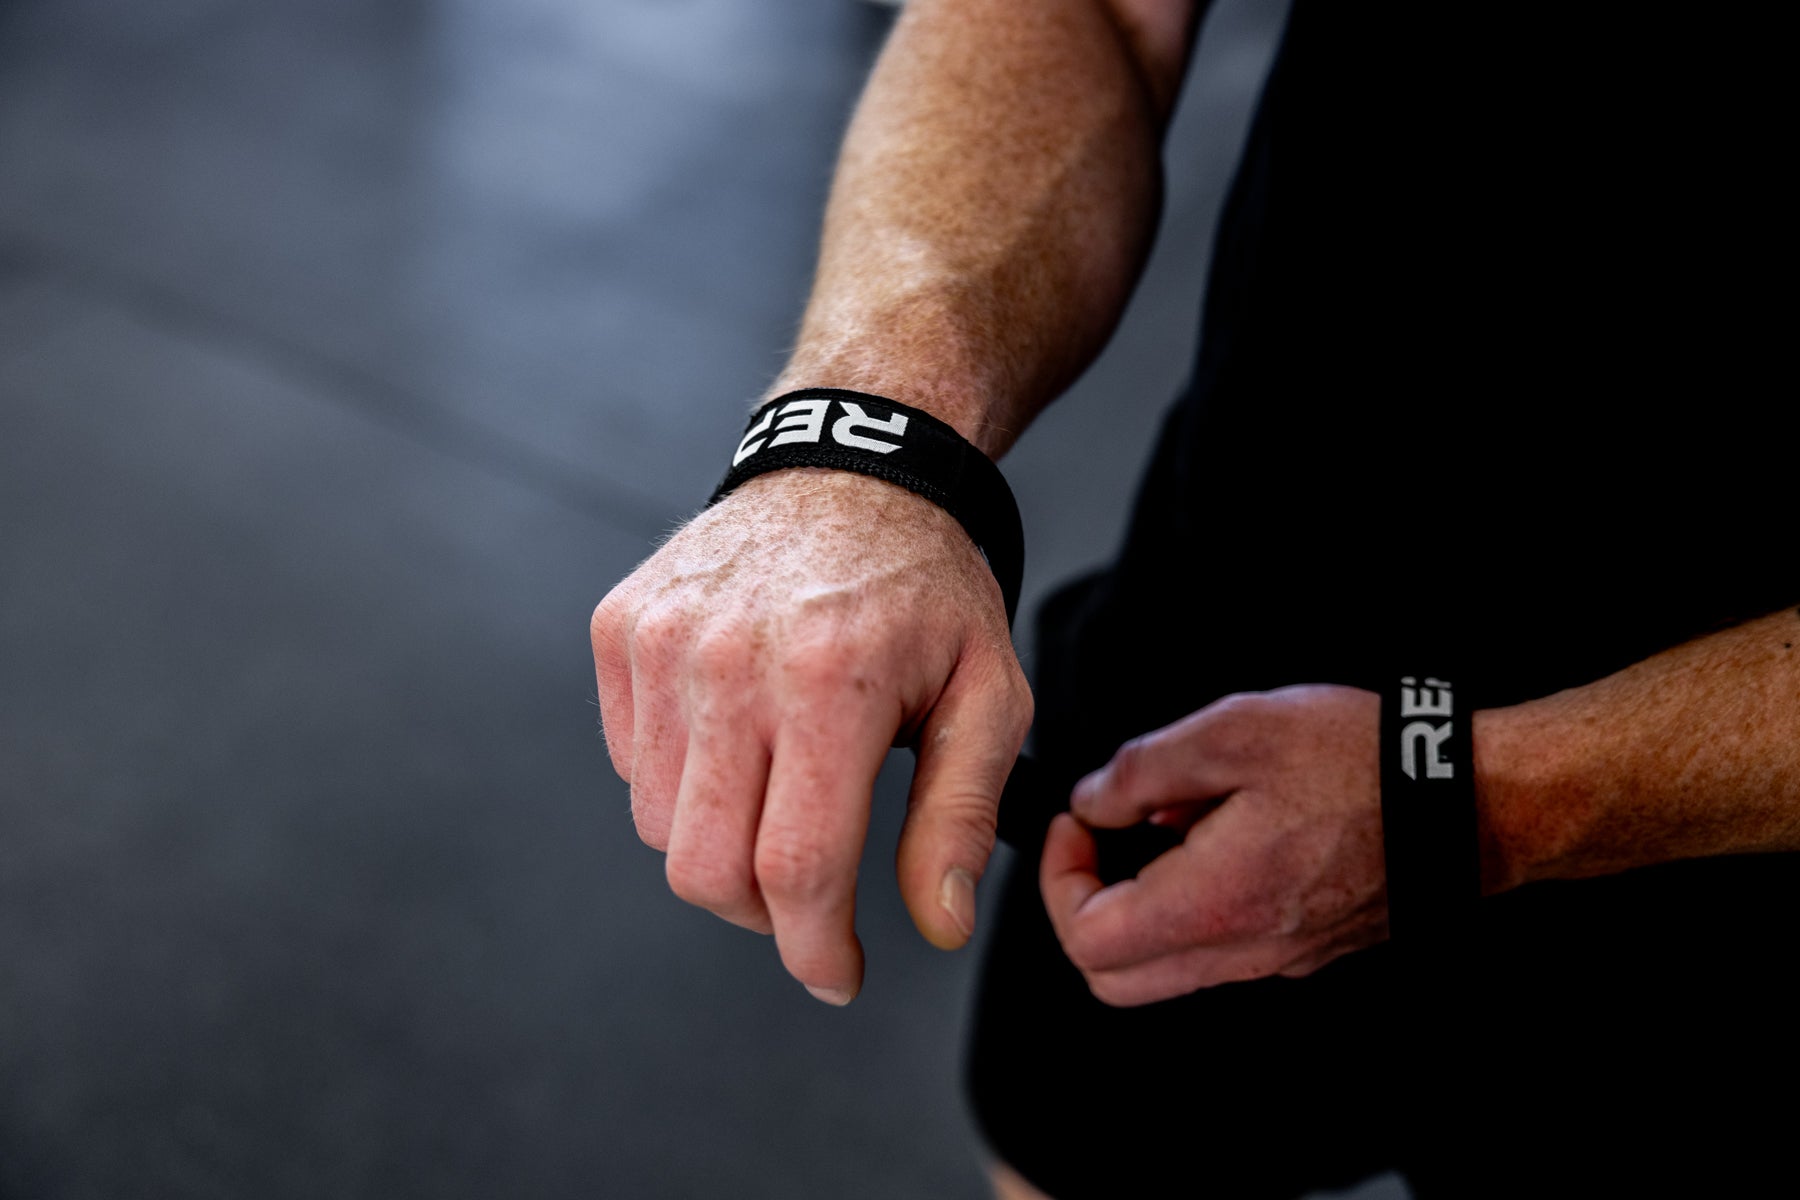 Close-up view of an athlete putting on a pair of black REP Olympic Lifting Straps.